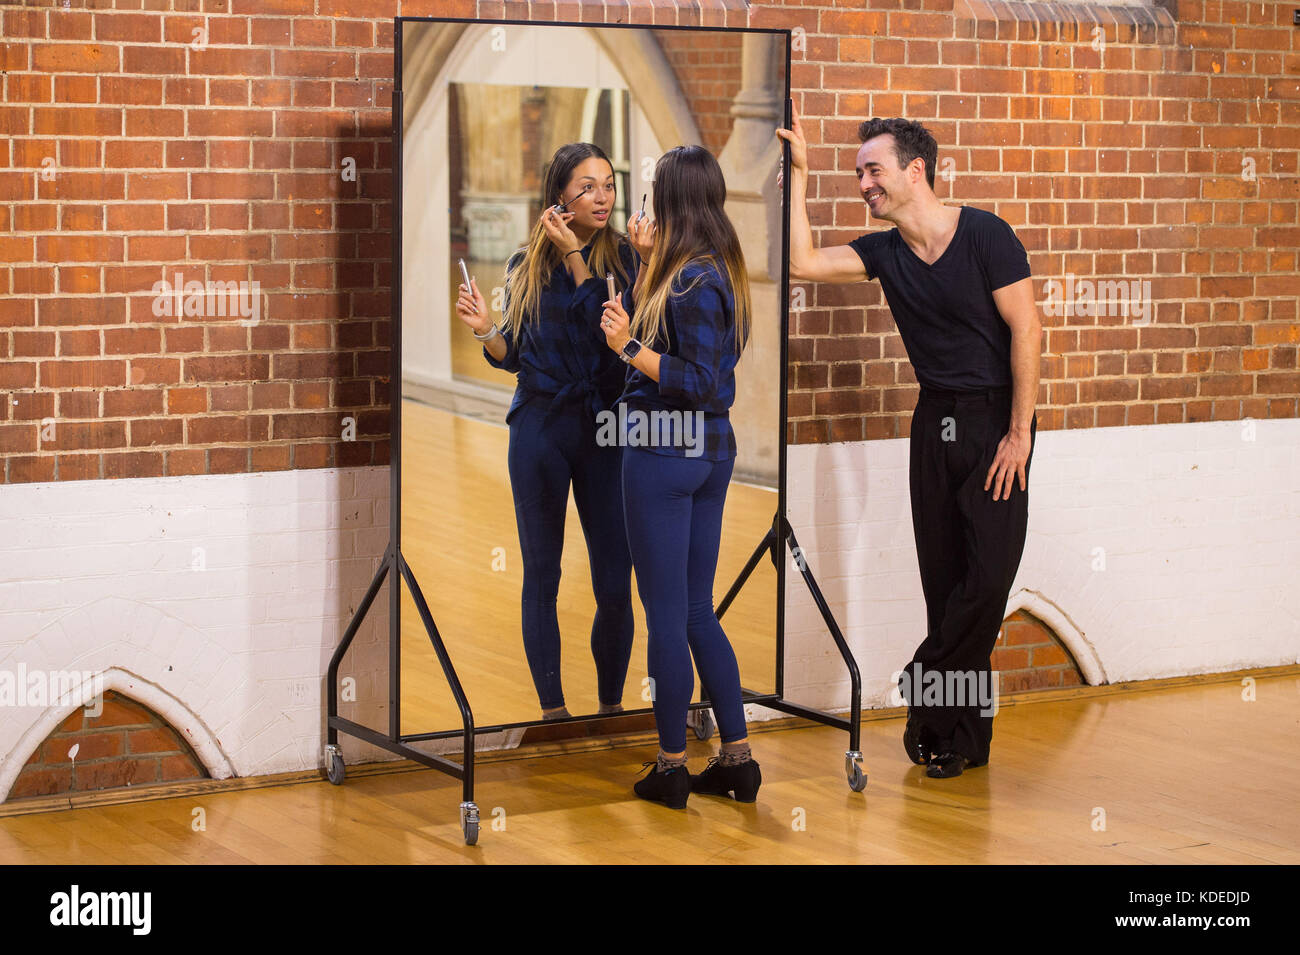 Joe McFadden and Katya Jones at a studio in London during rehearsals for BBC's Strictly Come Dancing. Stock Photo